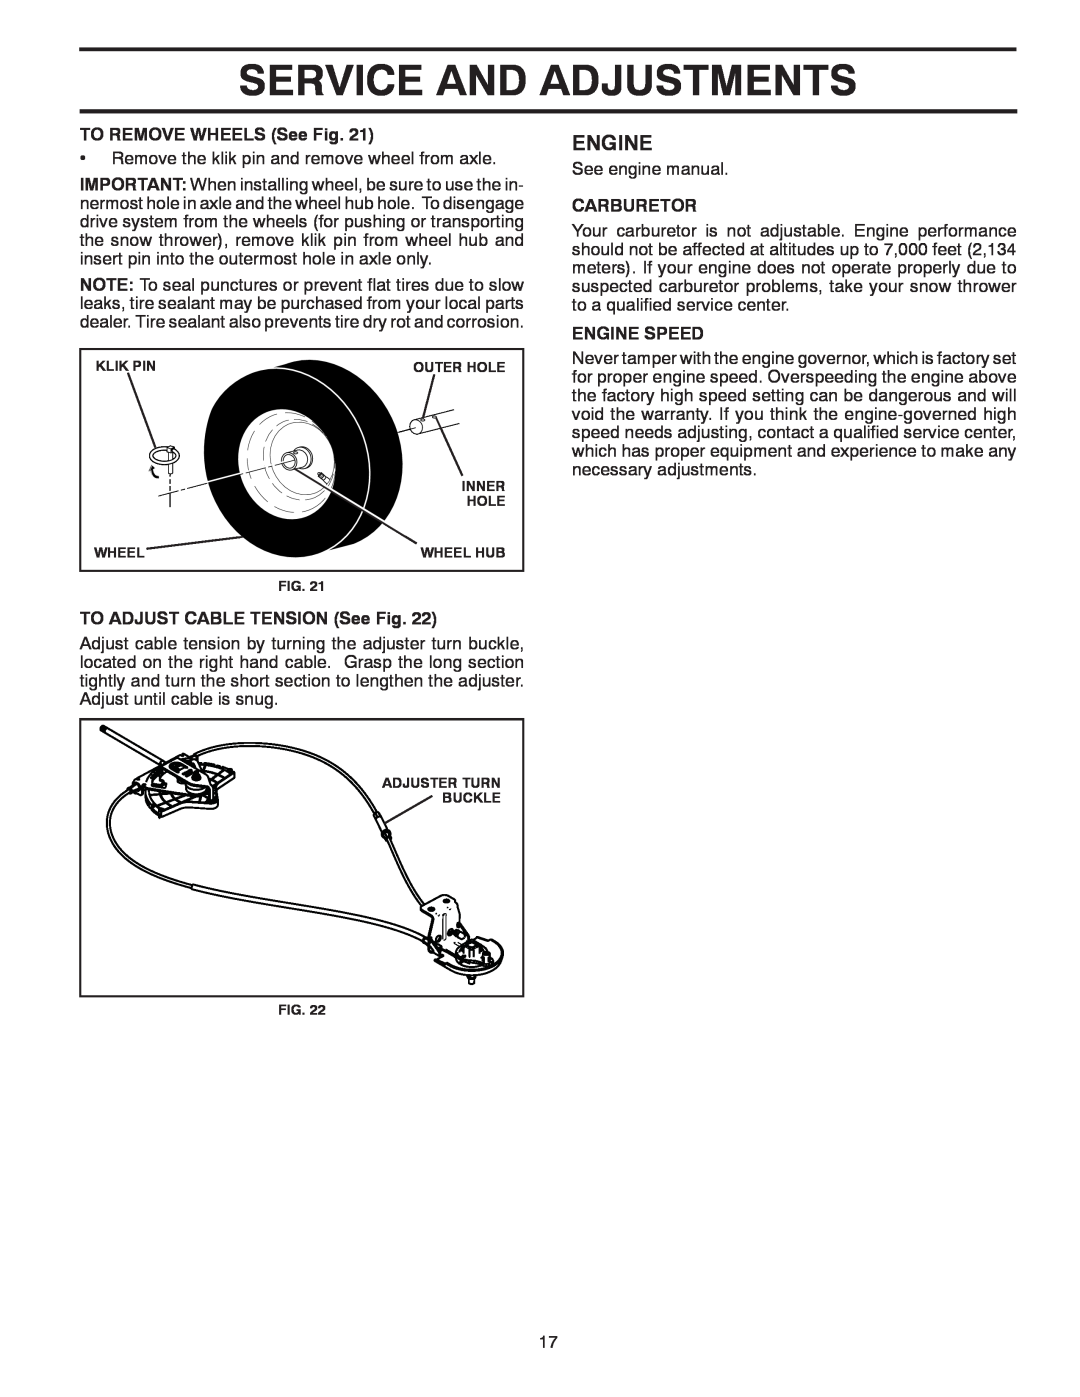 Poulan 96192003302 Service And Adjustments, Engine, TO REMOVE WHEELS See Fig, TO ADJUST CABLE TENSION See Fig, Carburetor 